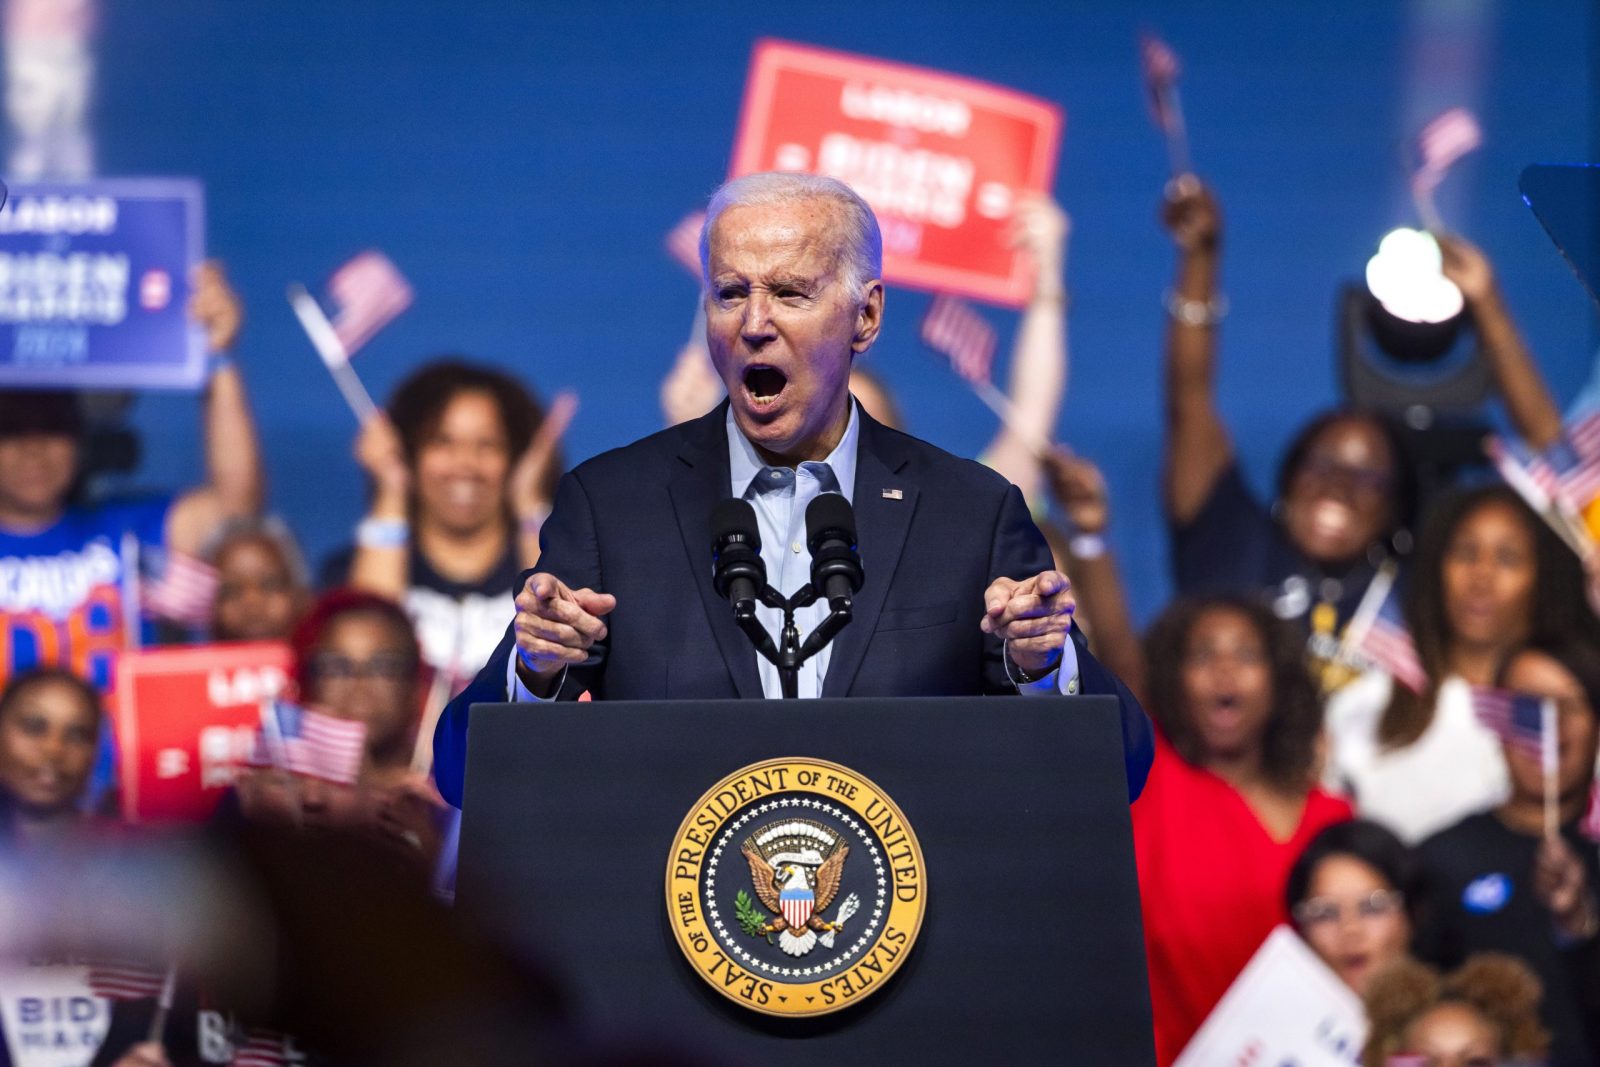 epa10697124 US President Joe Biden kicks off his reelection campaign with a speech to union members in Philadelphia, Pennsylvania, USA, 17 June 2023. Biden spoke about his labor record and legislative accomplishments at the AFL-CIO rally, which was the first big event in his bid for the 2024 presidency.  EPA/JIM LO SCALZO